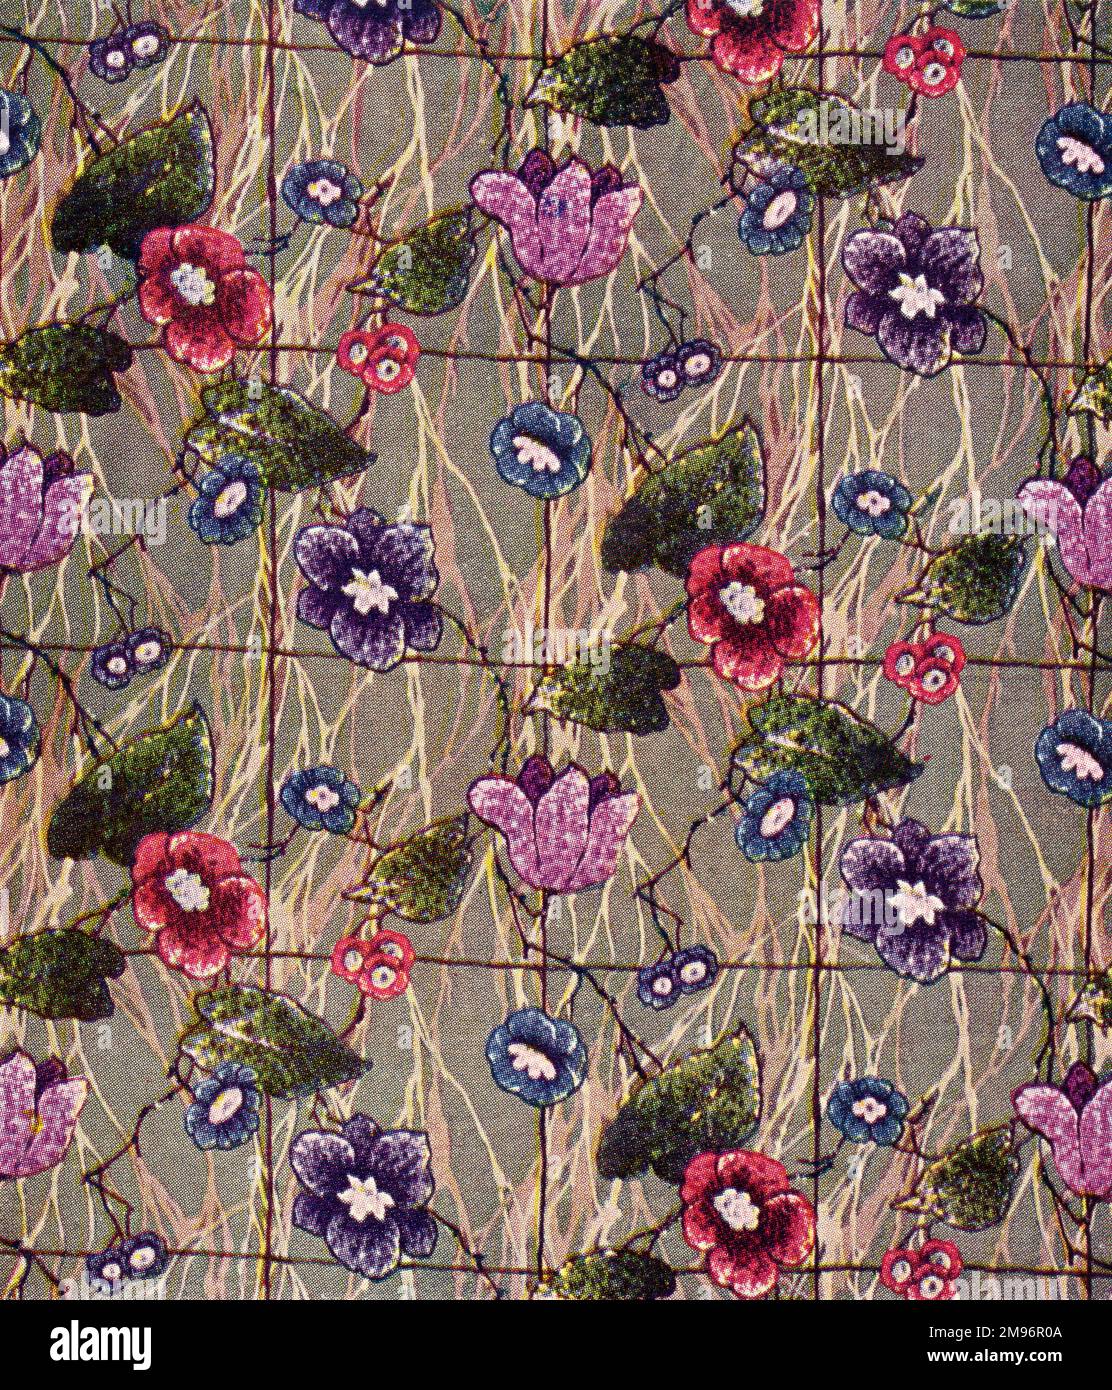 Fabric design depicting florals against a grey patterned background Stock Photo